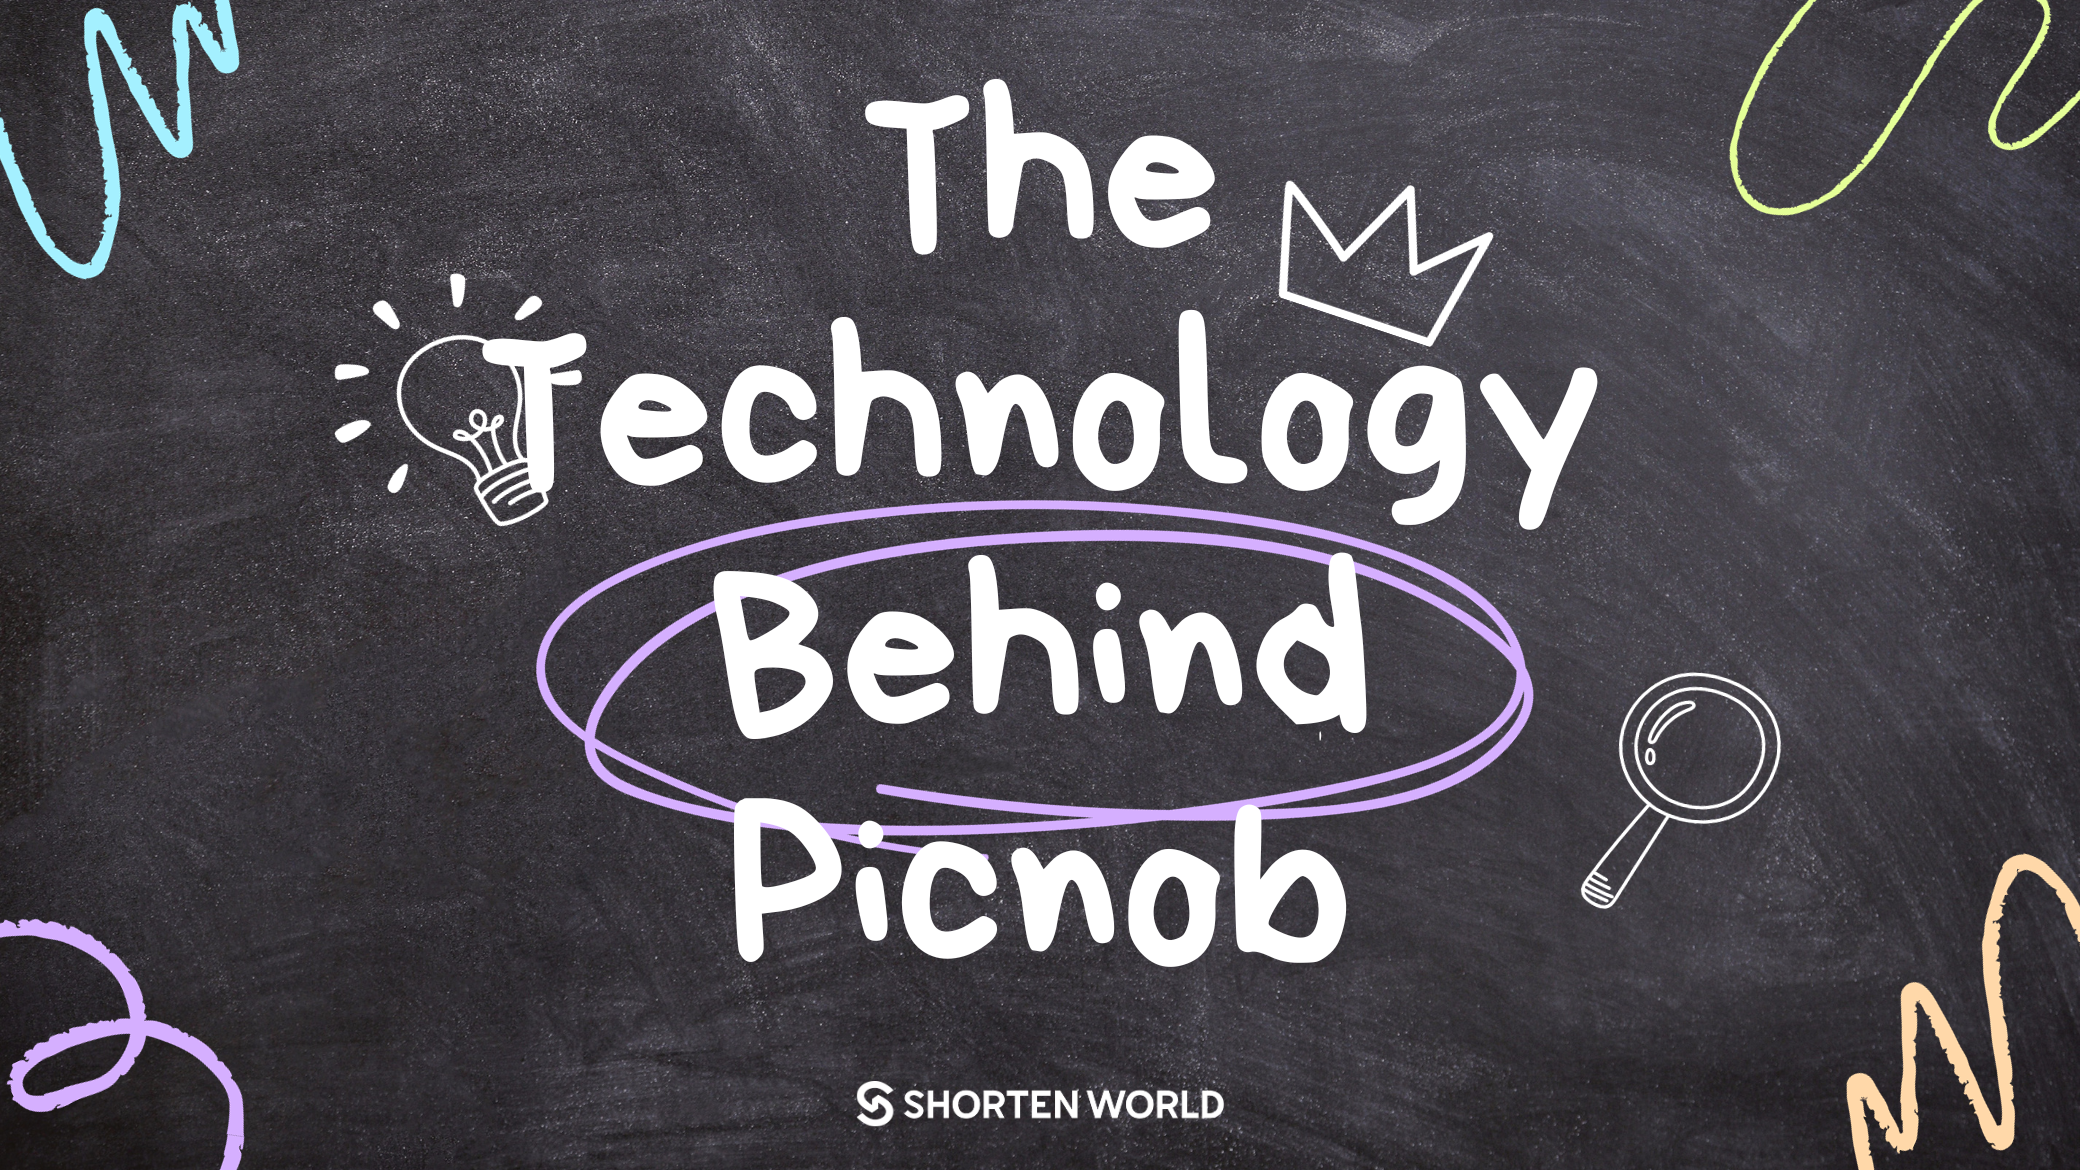 The Technology Behind Picnob